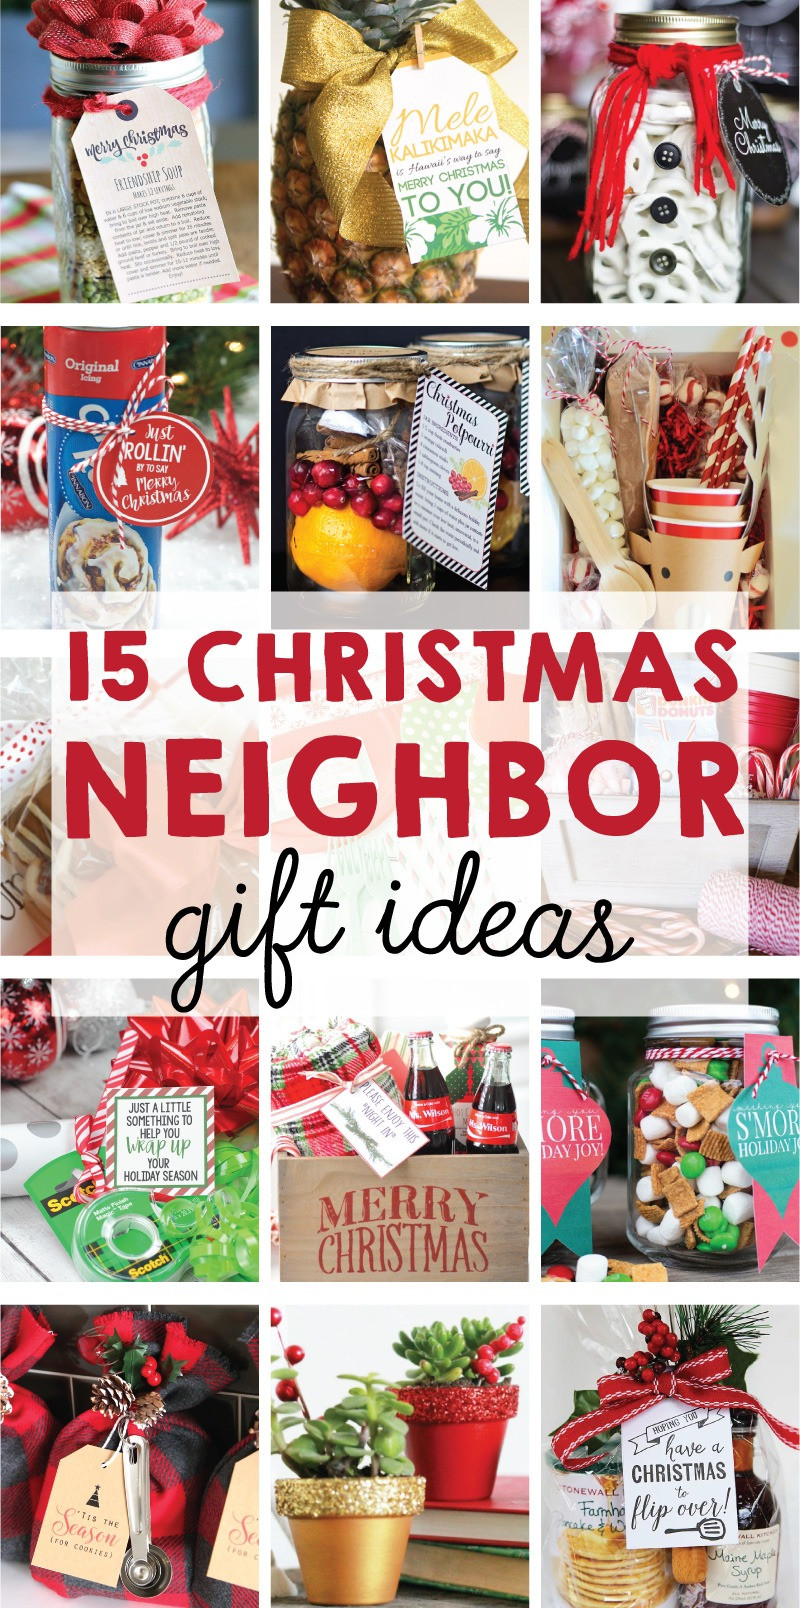 Christmas Gifts For Neighbors
 The BEST 15 Christmas Neighbor Gift Ideas on Love the Day